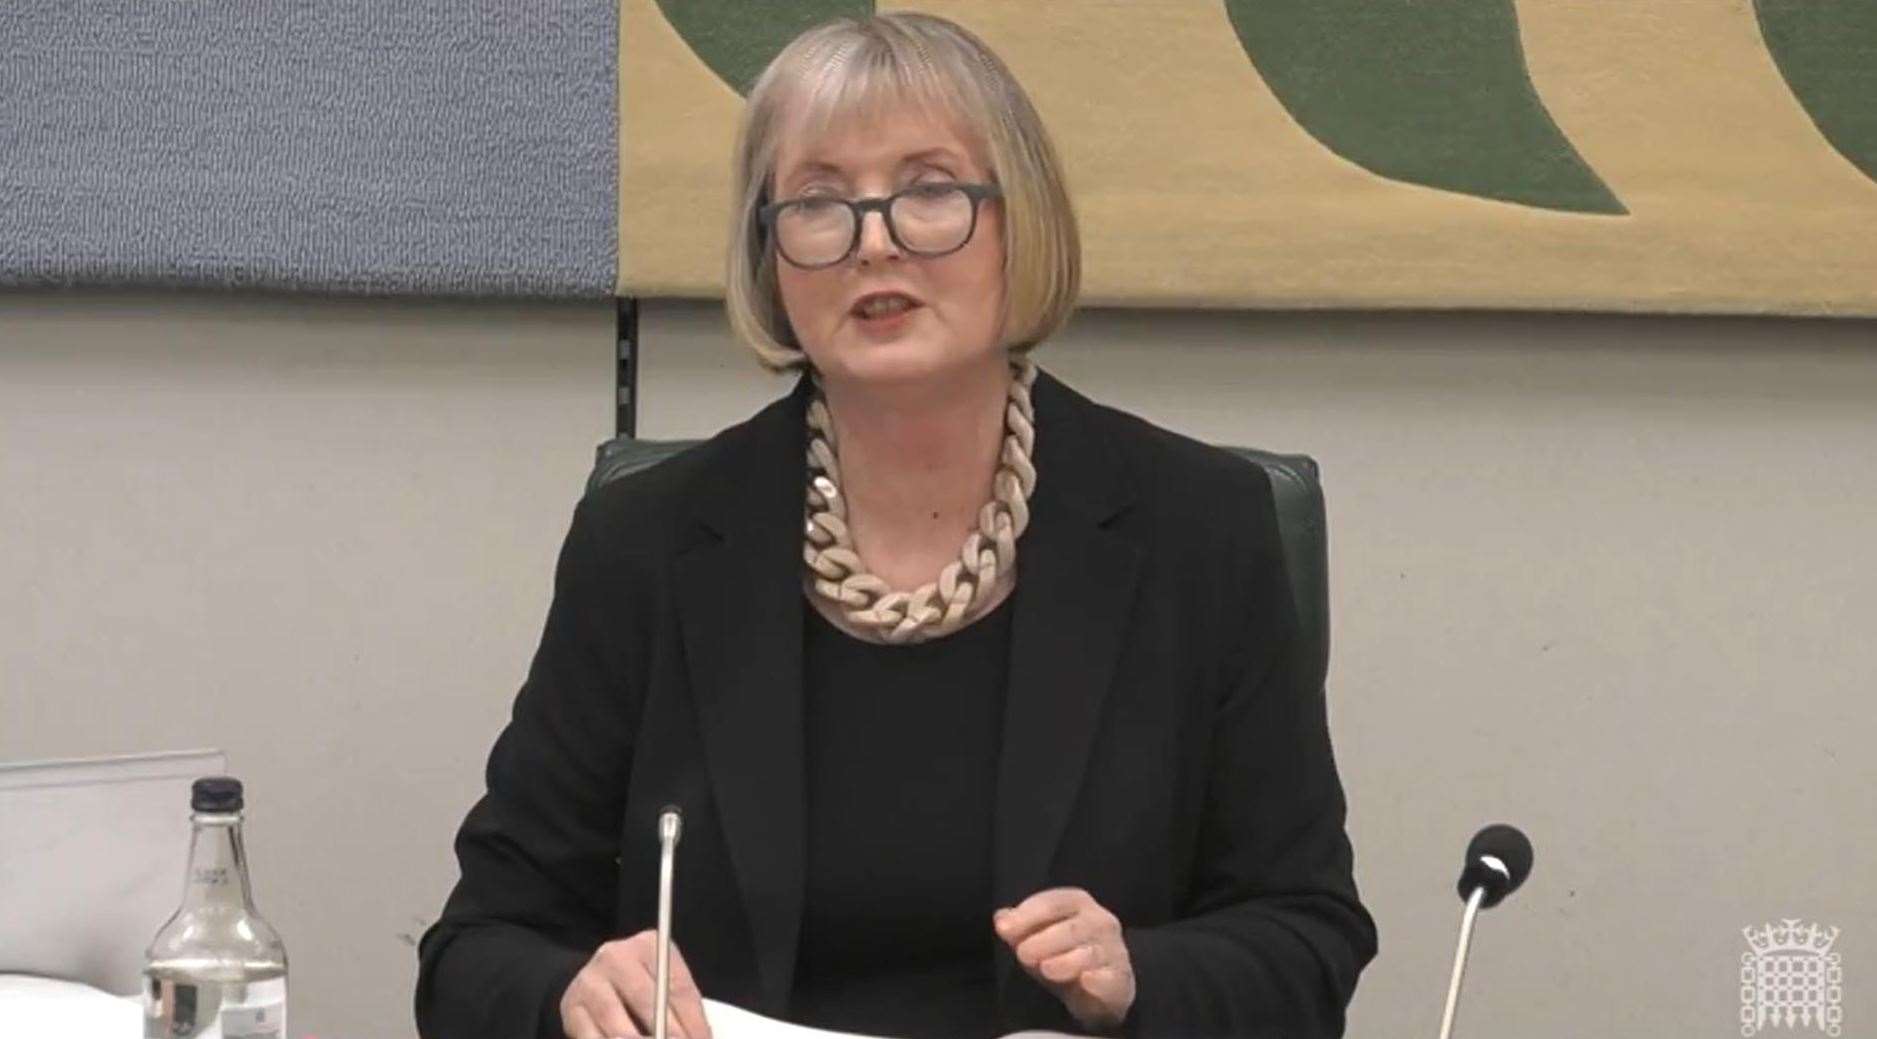 Committee chair Harriet Harman (House of Commons/UK Parliament/PA)